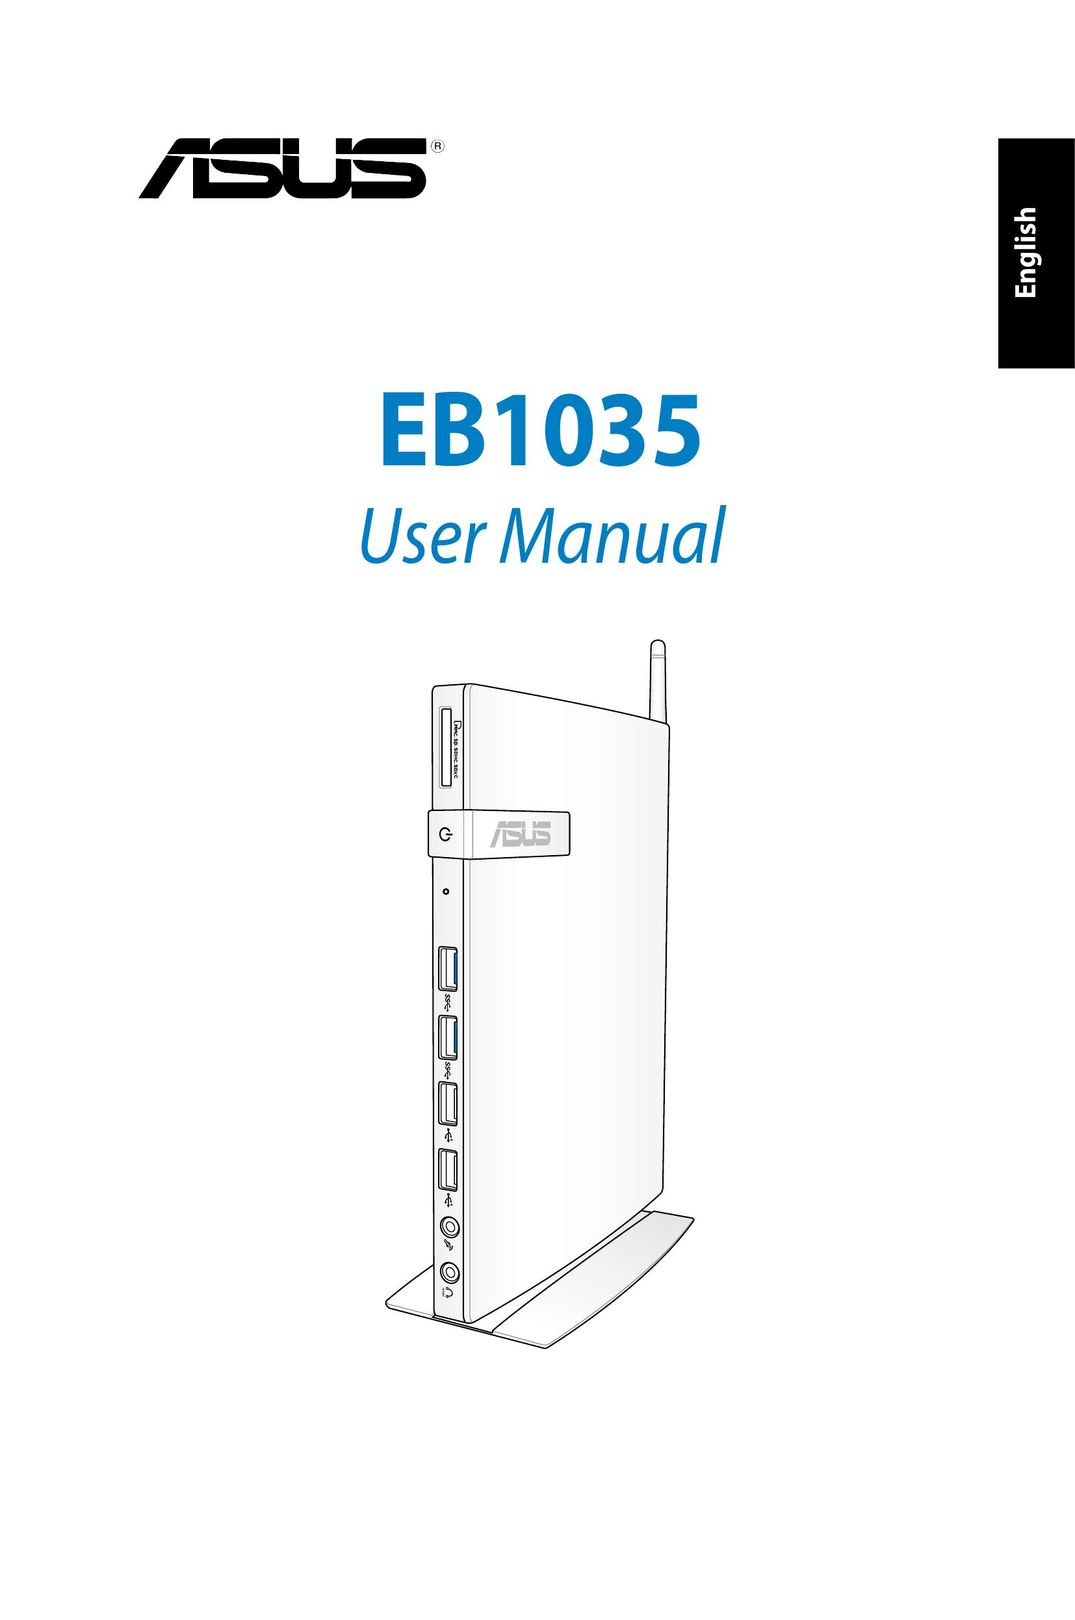 Asus EB1035-B010M Network Router User Manual